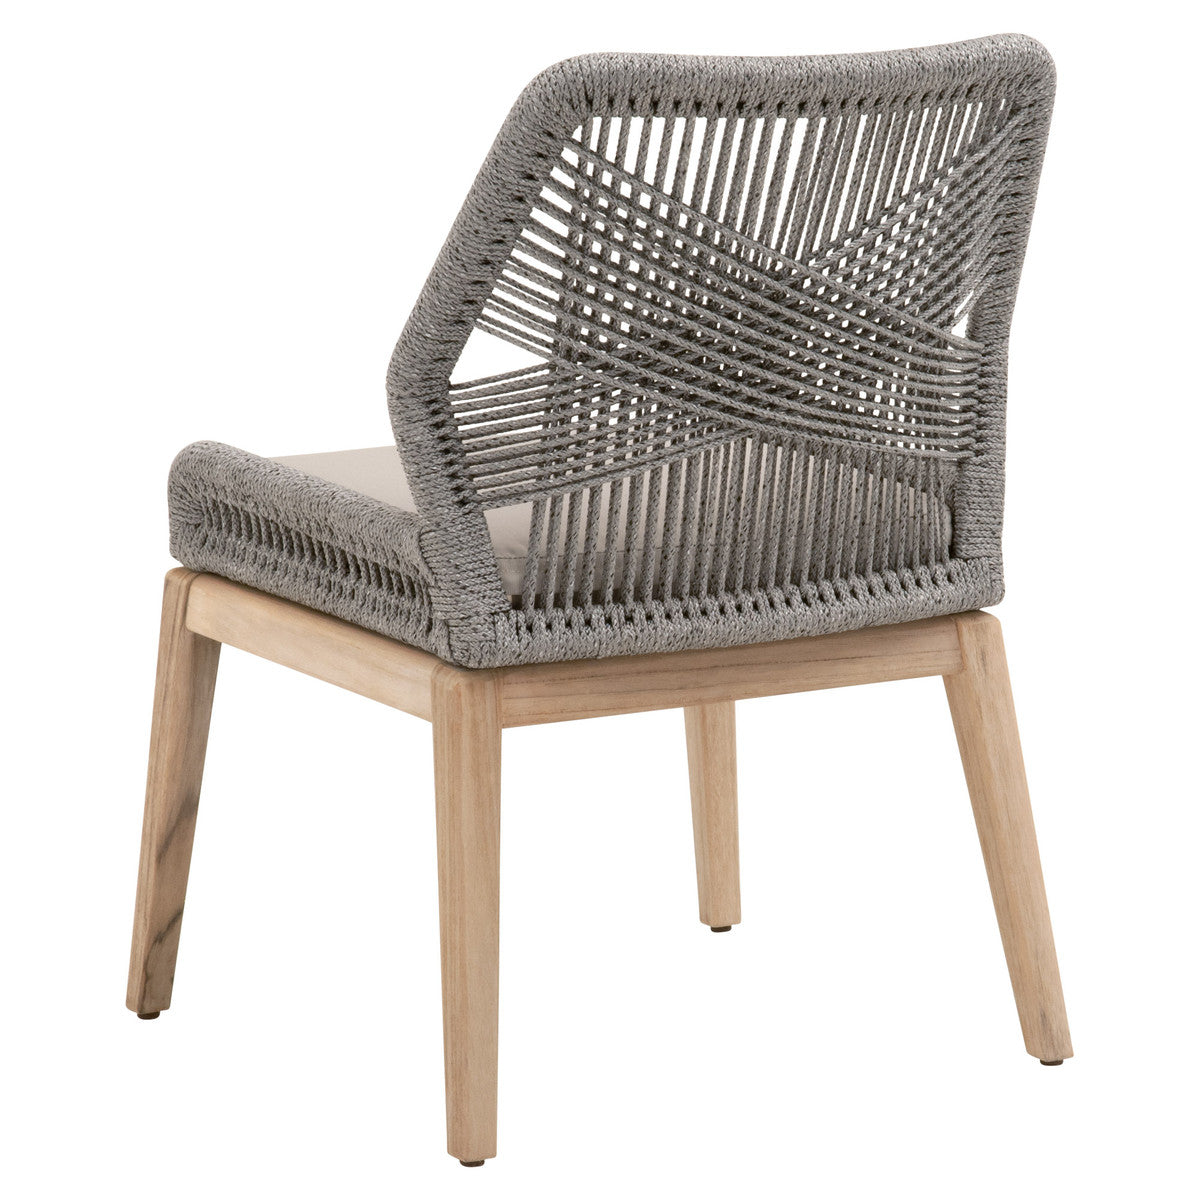 Loom Outdoor Dining Chair in Platinum Rope, Performance Smoke Gray, Gray Teak, Set of 2 - 6808KD.PLA-R/SG/GT